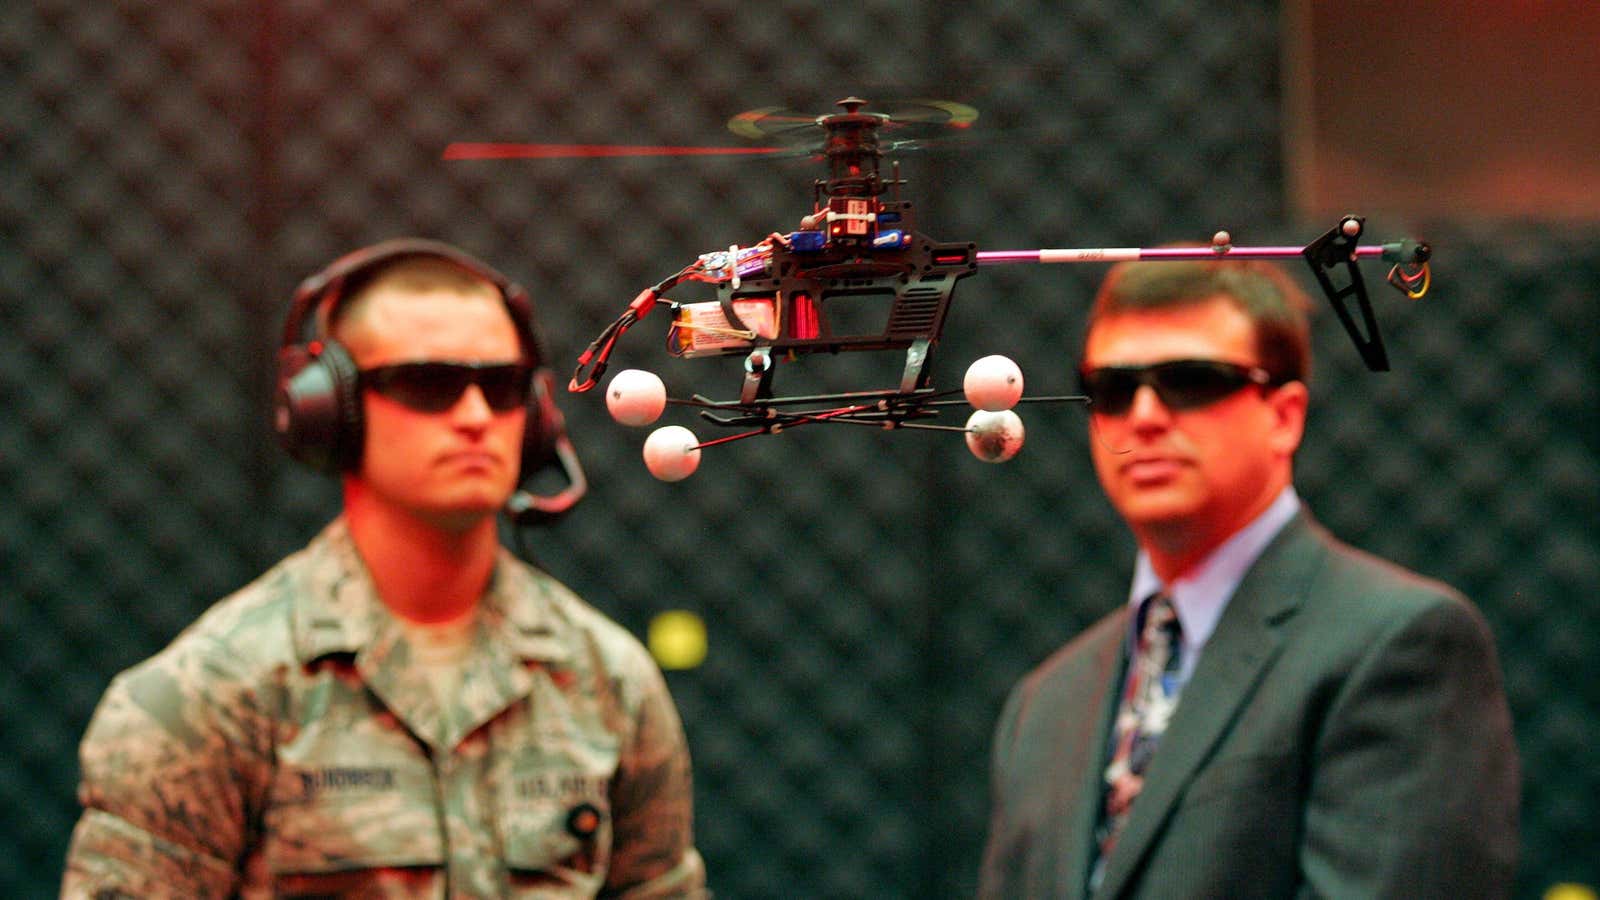 US drones will have a cool reception.